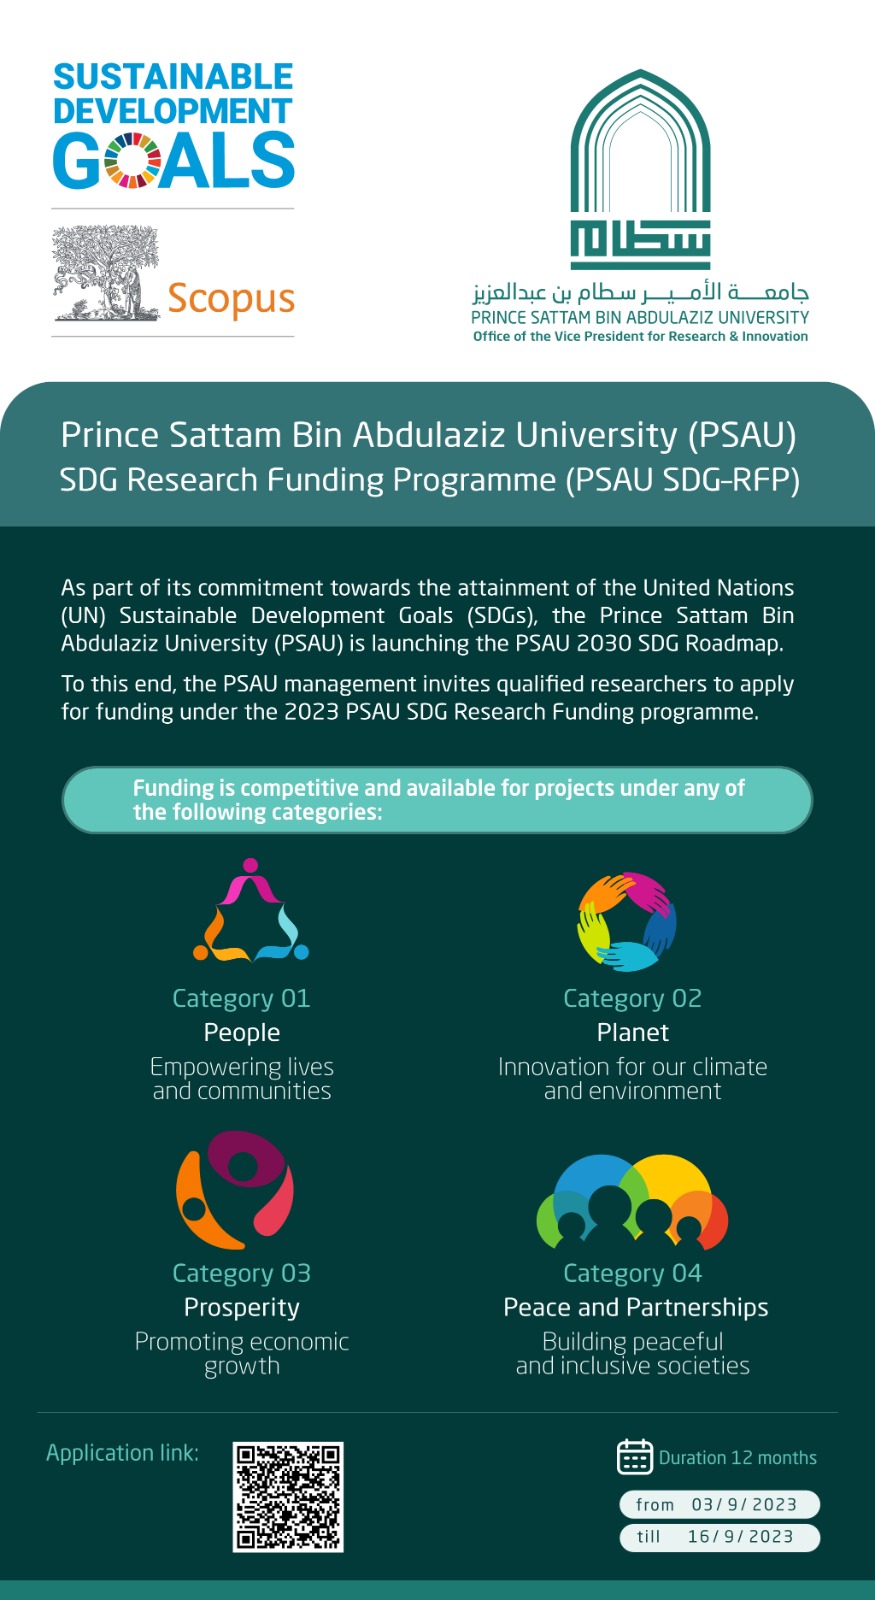 Prince Sattam bin Abdulaziz University announces the opening of applications under a new program aimed at providing competitive funding to support research towards achieving the SDGs.  This program is part of the university's PSAU 2030 SDG Roadmap.